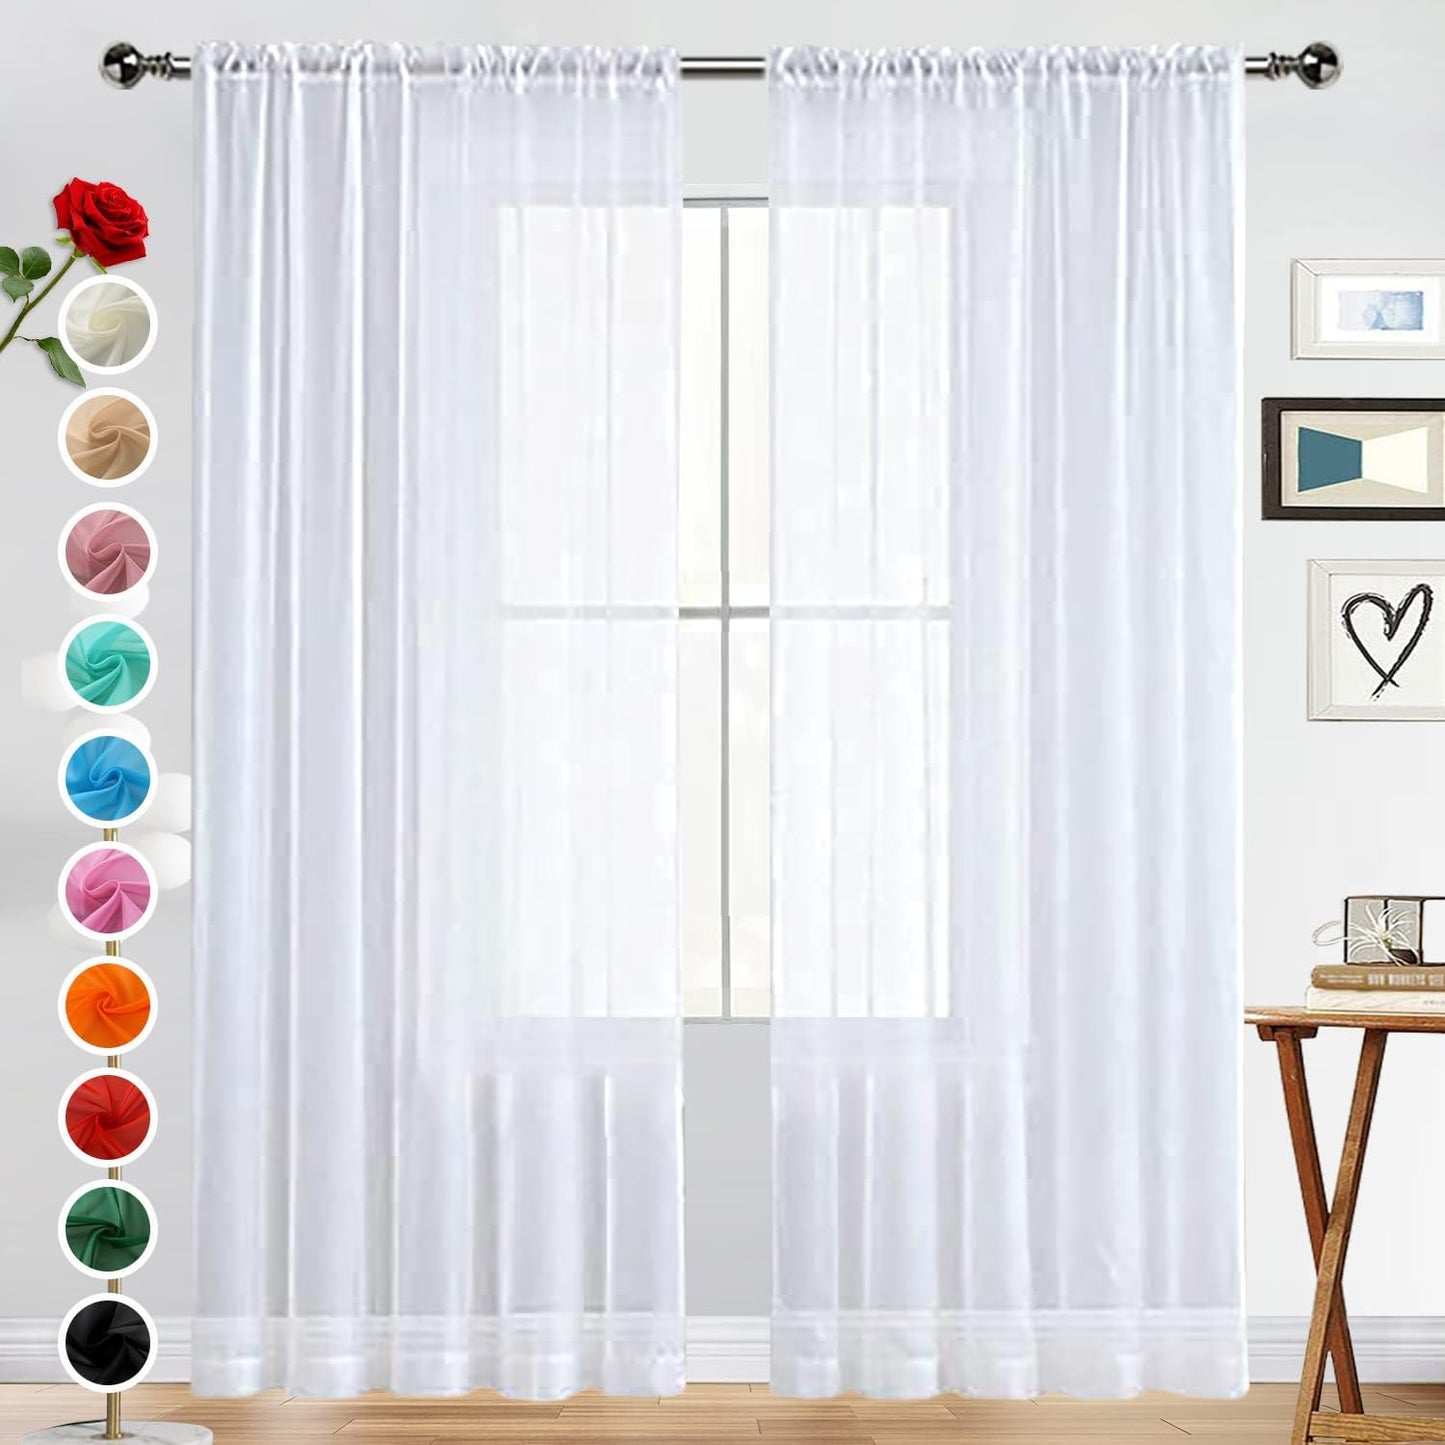 Spacedresser Basic Rod Pocket Sheer Voile Window Curtain Panels White 1 Pair 2 Panels 52 Width 84 Inch Long for Kitchen Bedroom Children Living Room Yard(White,52 W X 84 L)  Lucky Home White 52 W X 84 L 